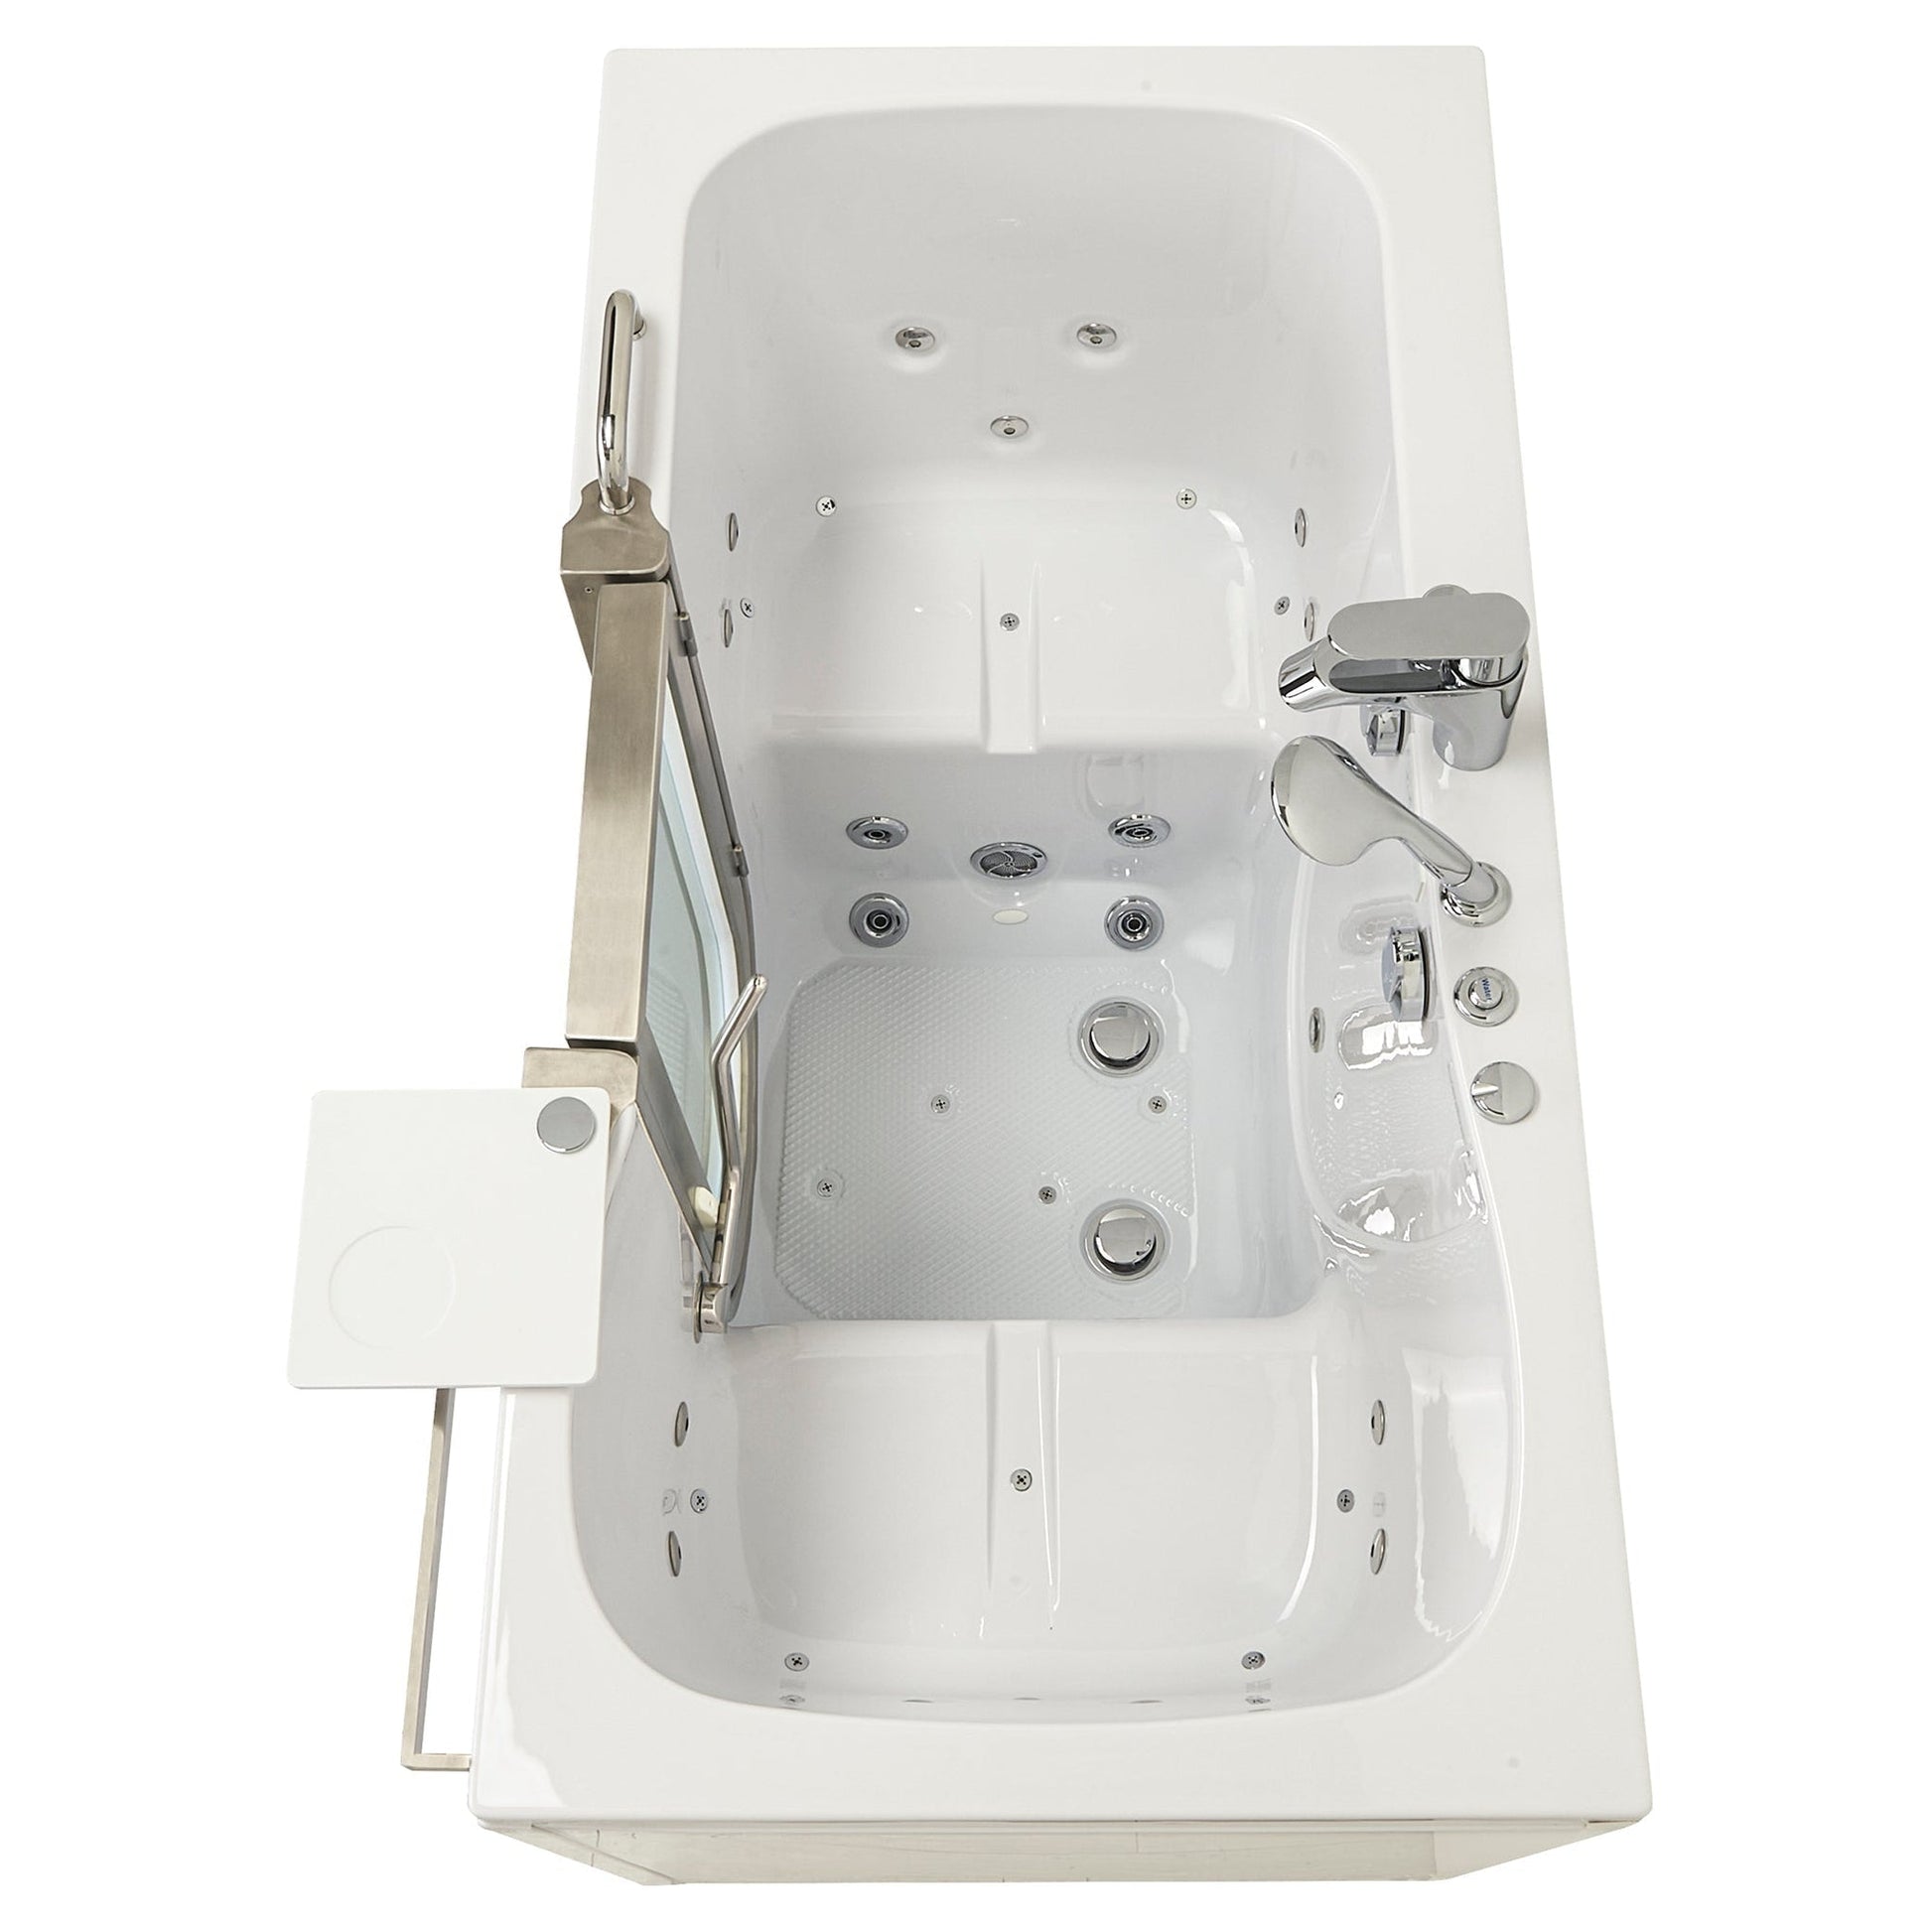 Ella’s Bubbles Companion 32" X 60" Two-Seated Hydro + Air Massage Walk-in Bathtub With Independent Foot Massage, 2 Piece Fast Fill Faucet, 2" Dual Drains and Stainless Steel U-Shape Inward Door